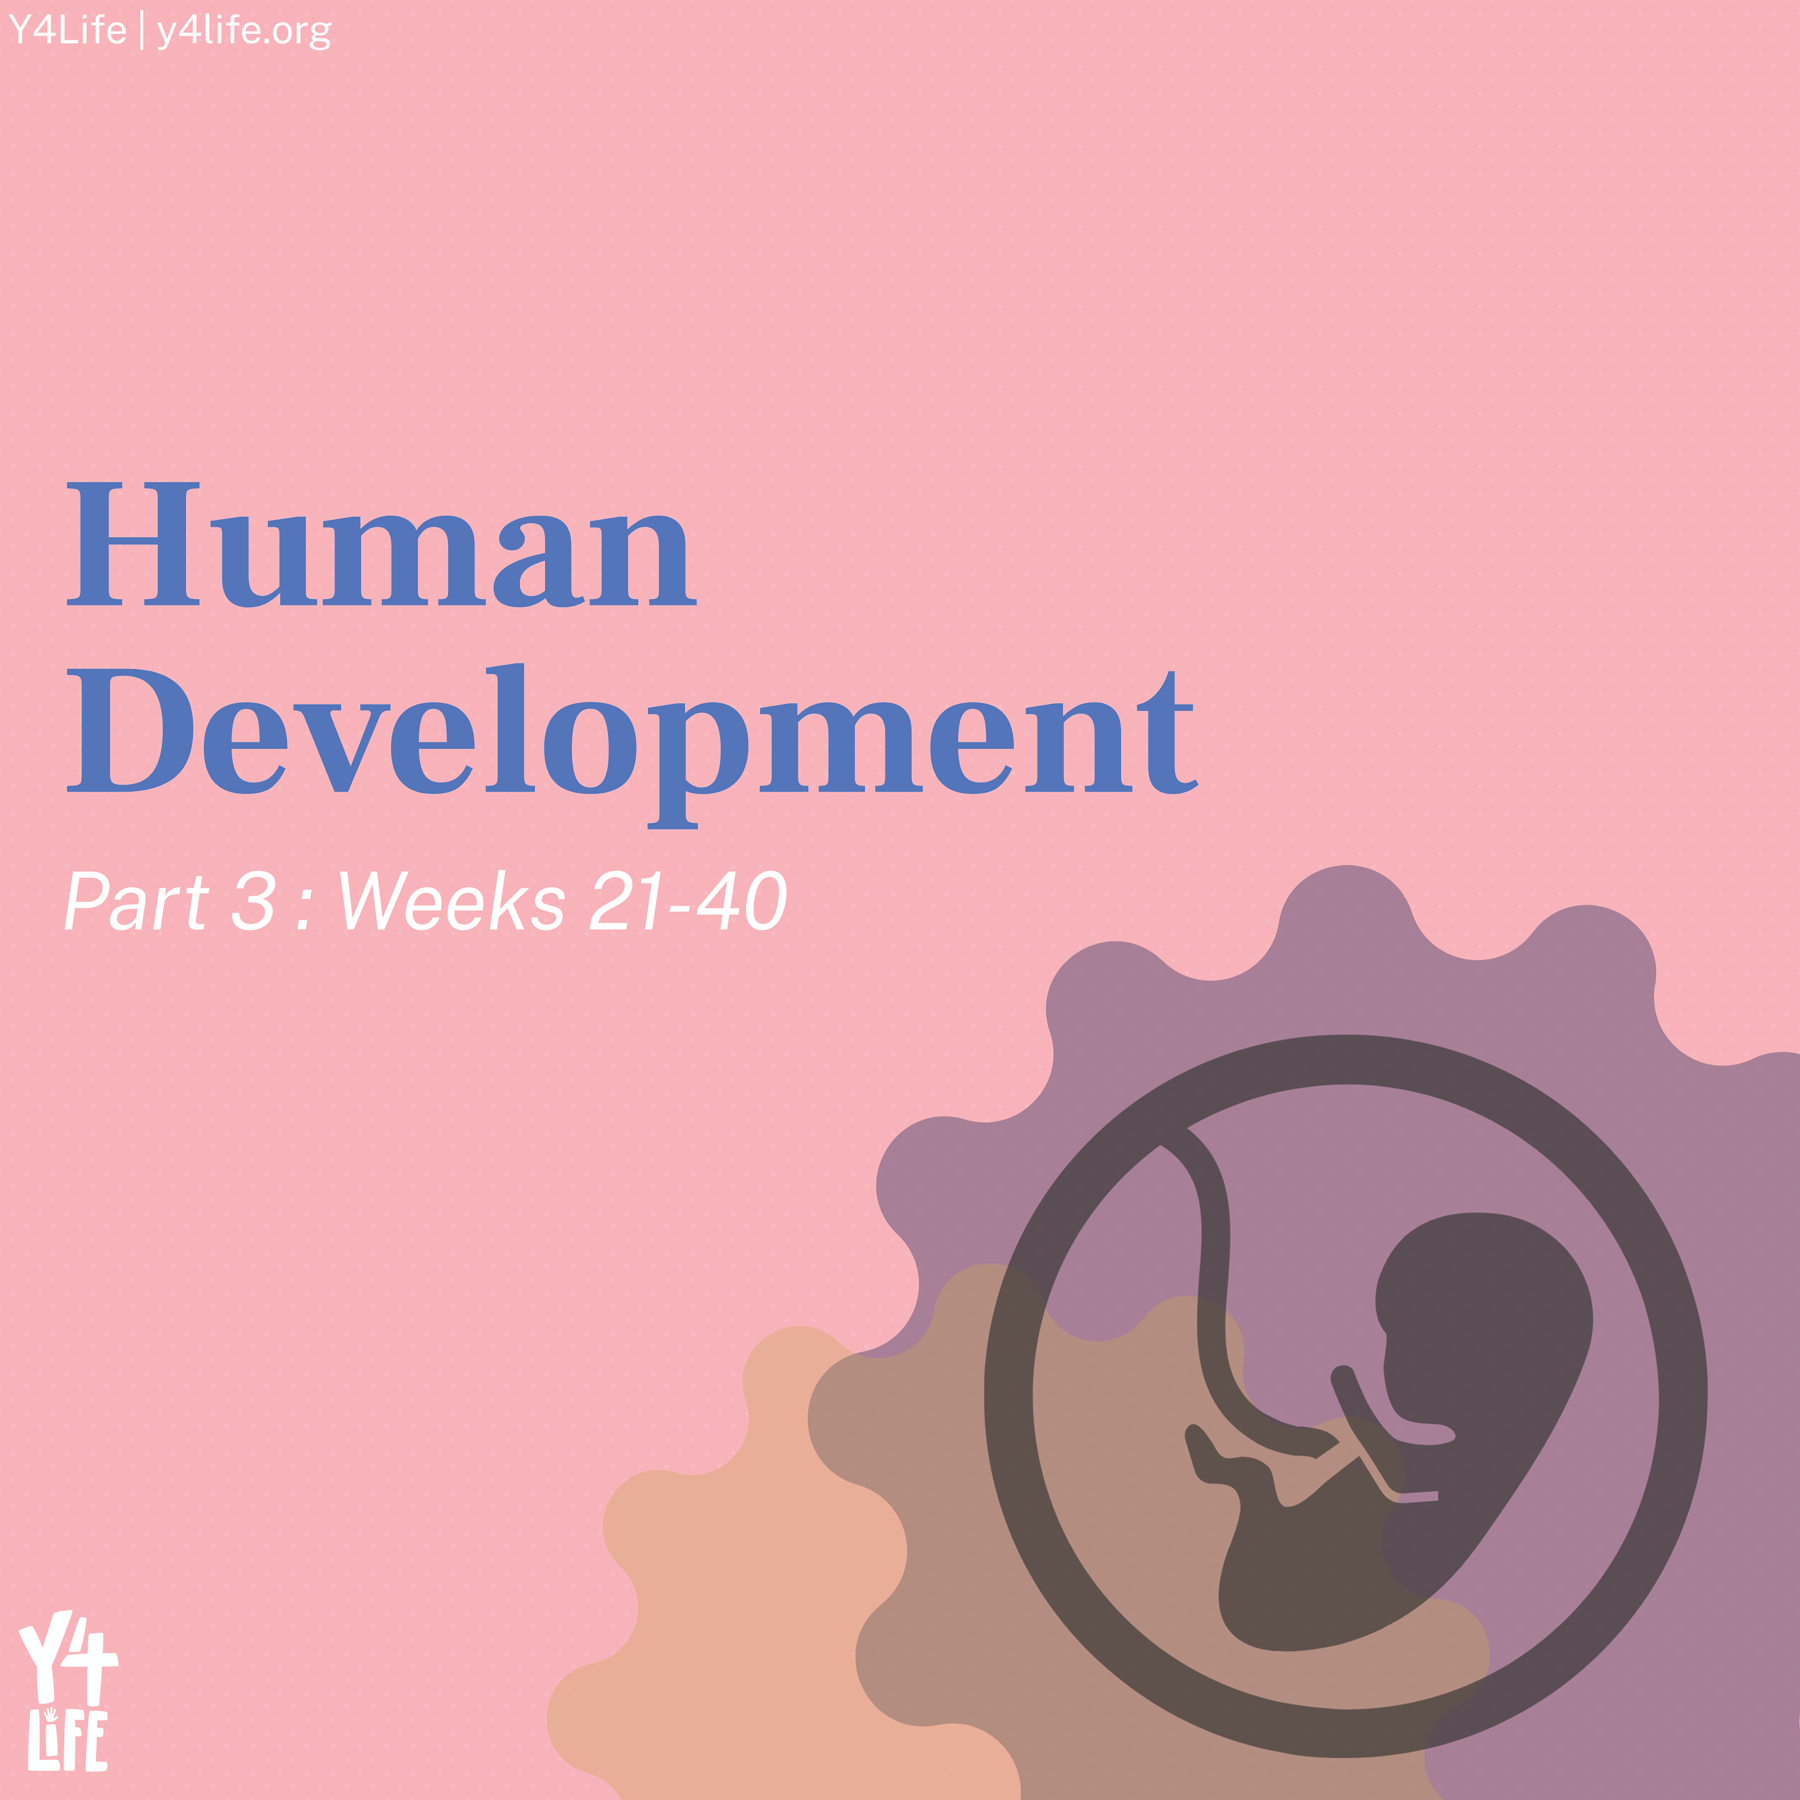 Human Development | Part 3: Weeks 21-40 – A Y4Life Infographic Booklet